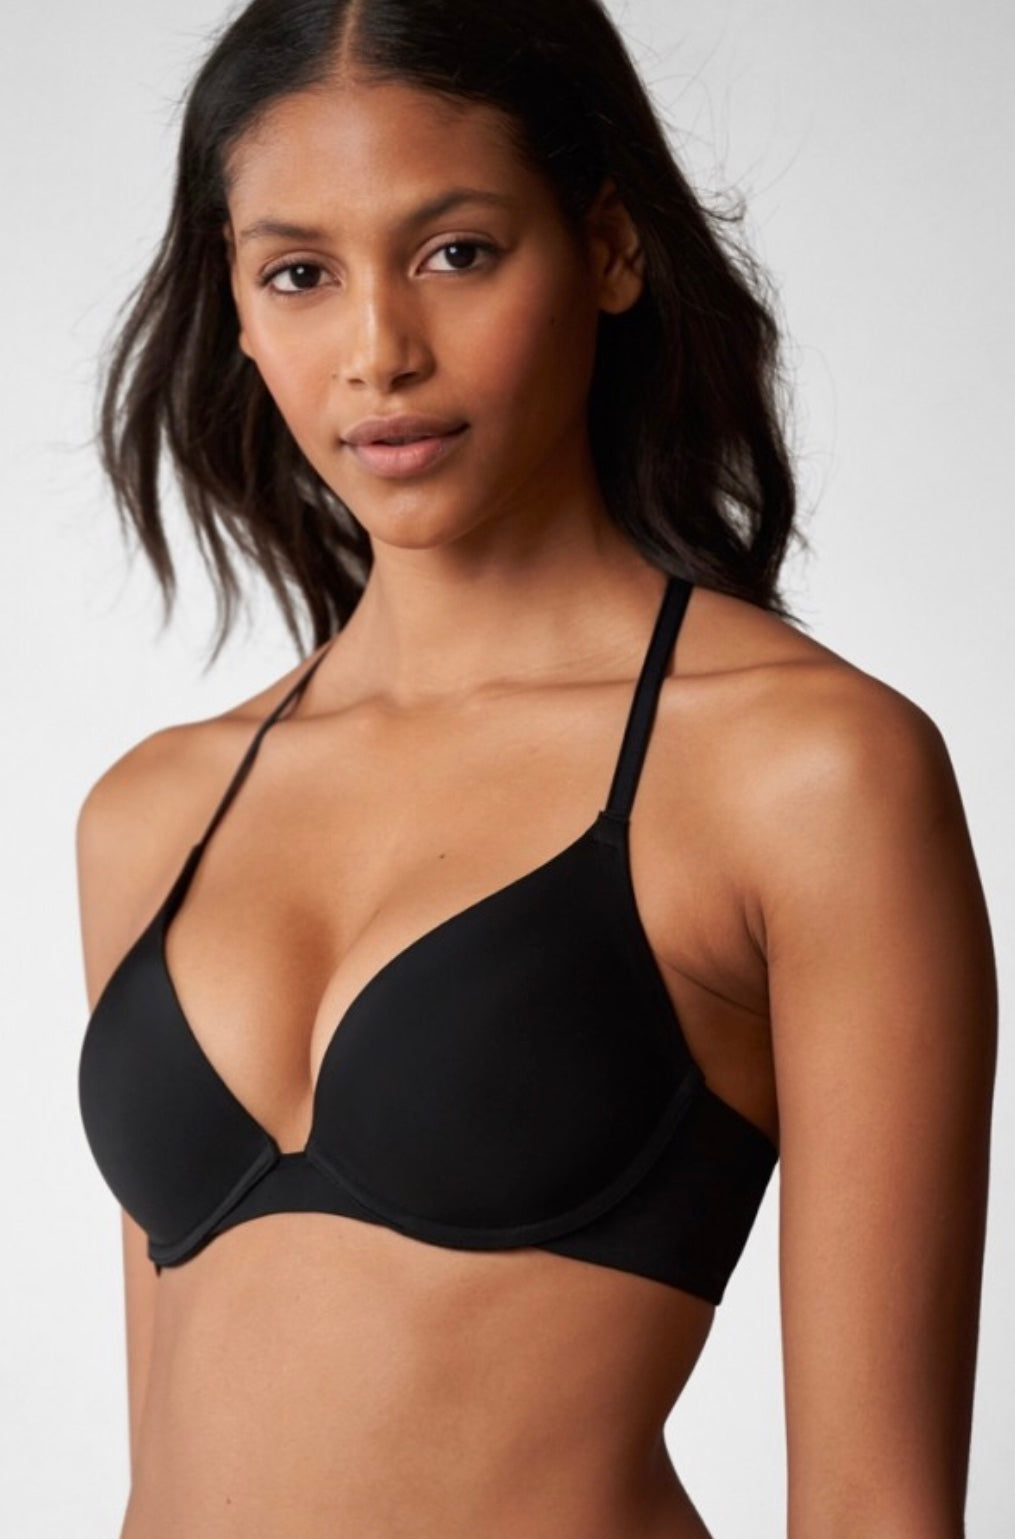 The Short Way - Lingerie Push-Up Bras - The Short Way